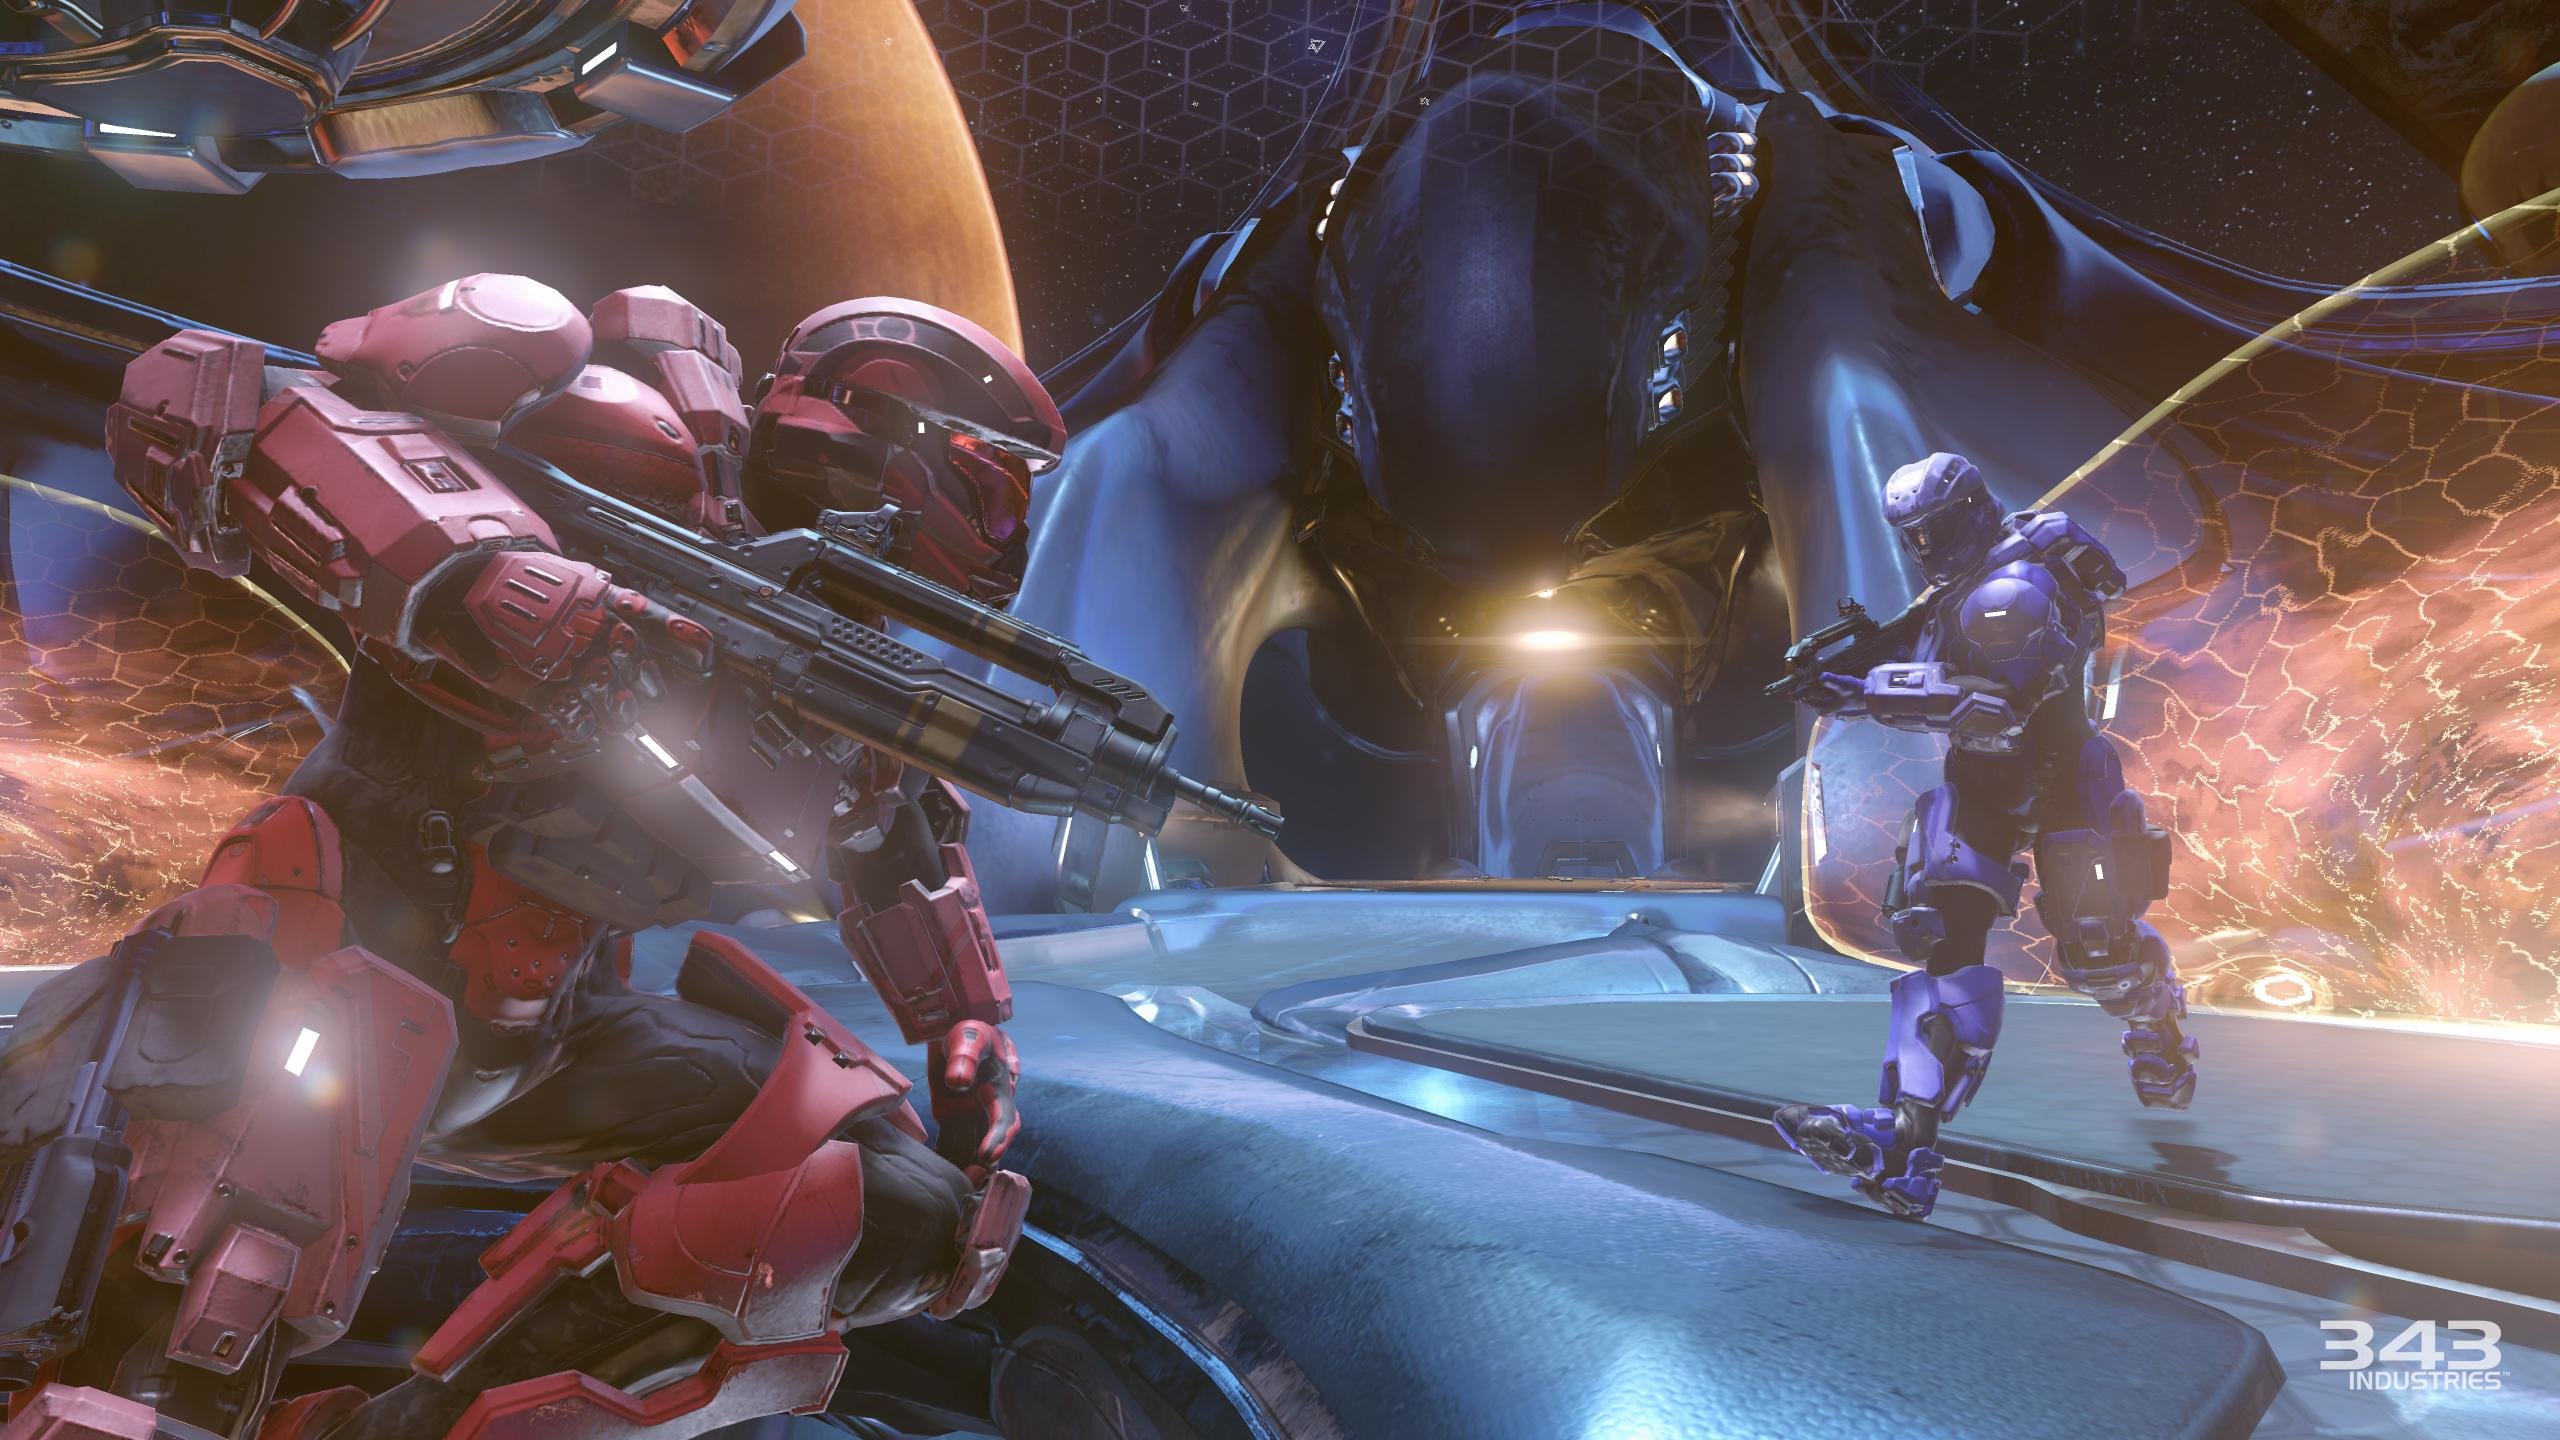 Awesome Halo 5: Guardians free wallpaper ID:117023 for hd 2560x1440 PC